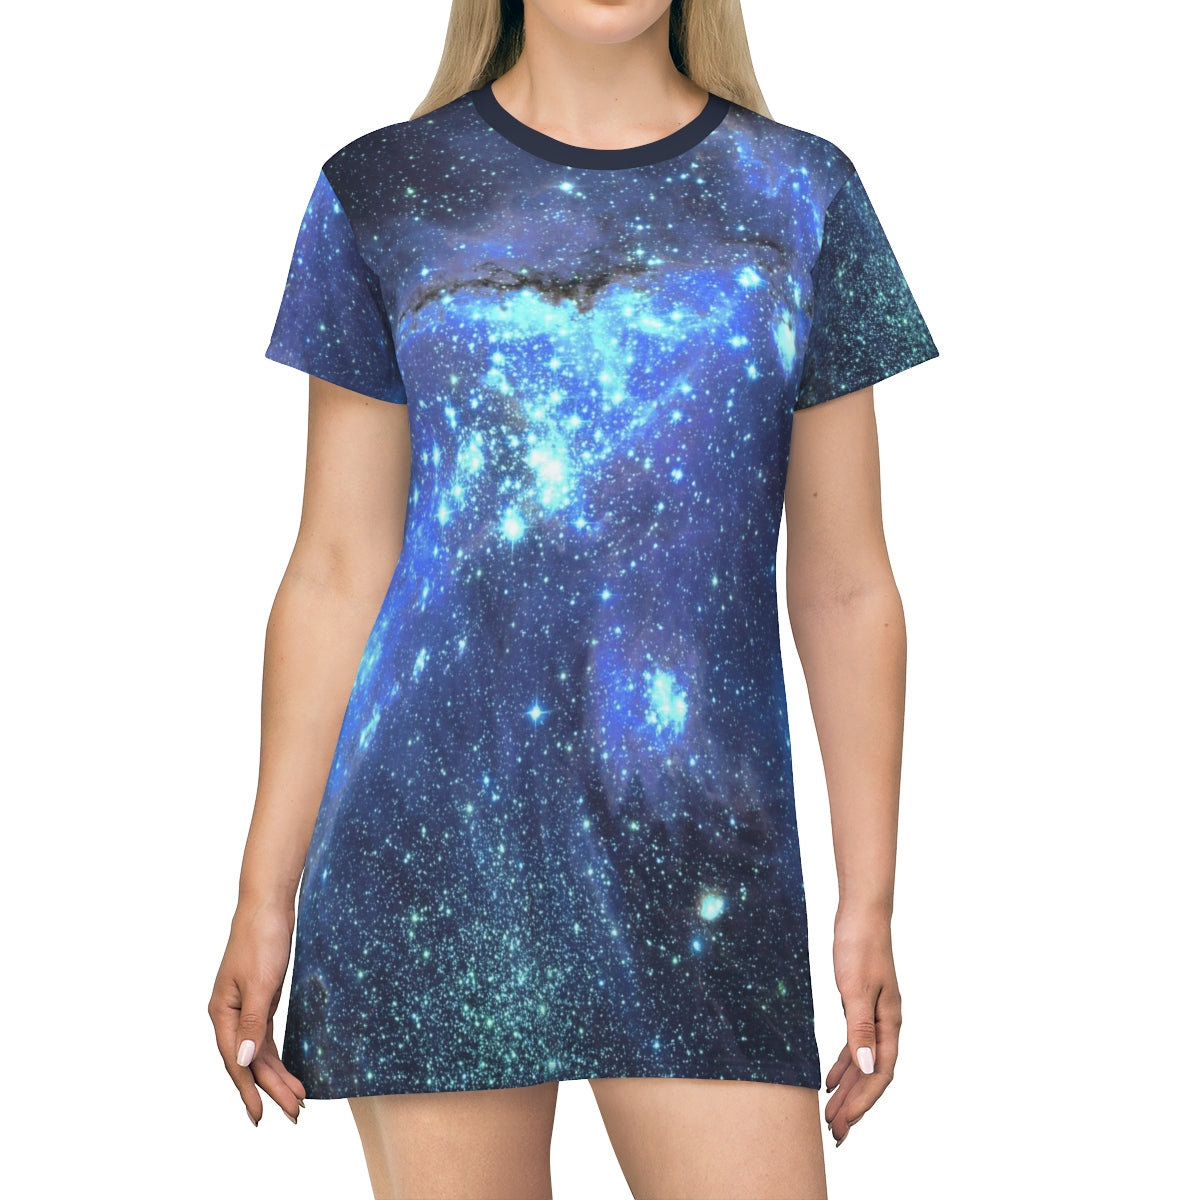 Space Galaxy T-shirt Dress, Blue Celestial Constellation Outer Space Star Print Festival Party Night Sky Casual Summer Dress Starcove Fashion